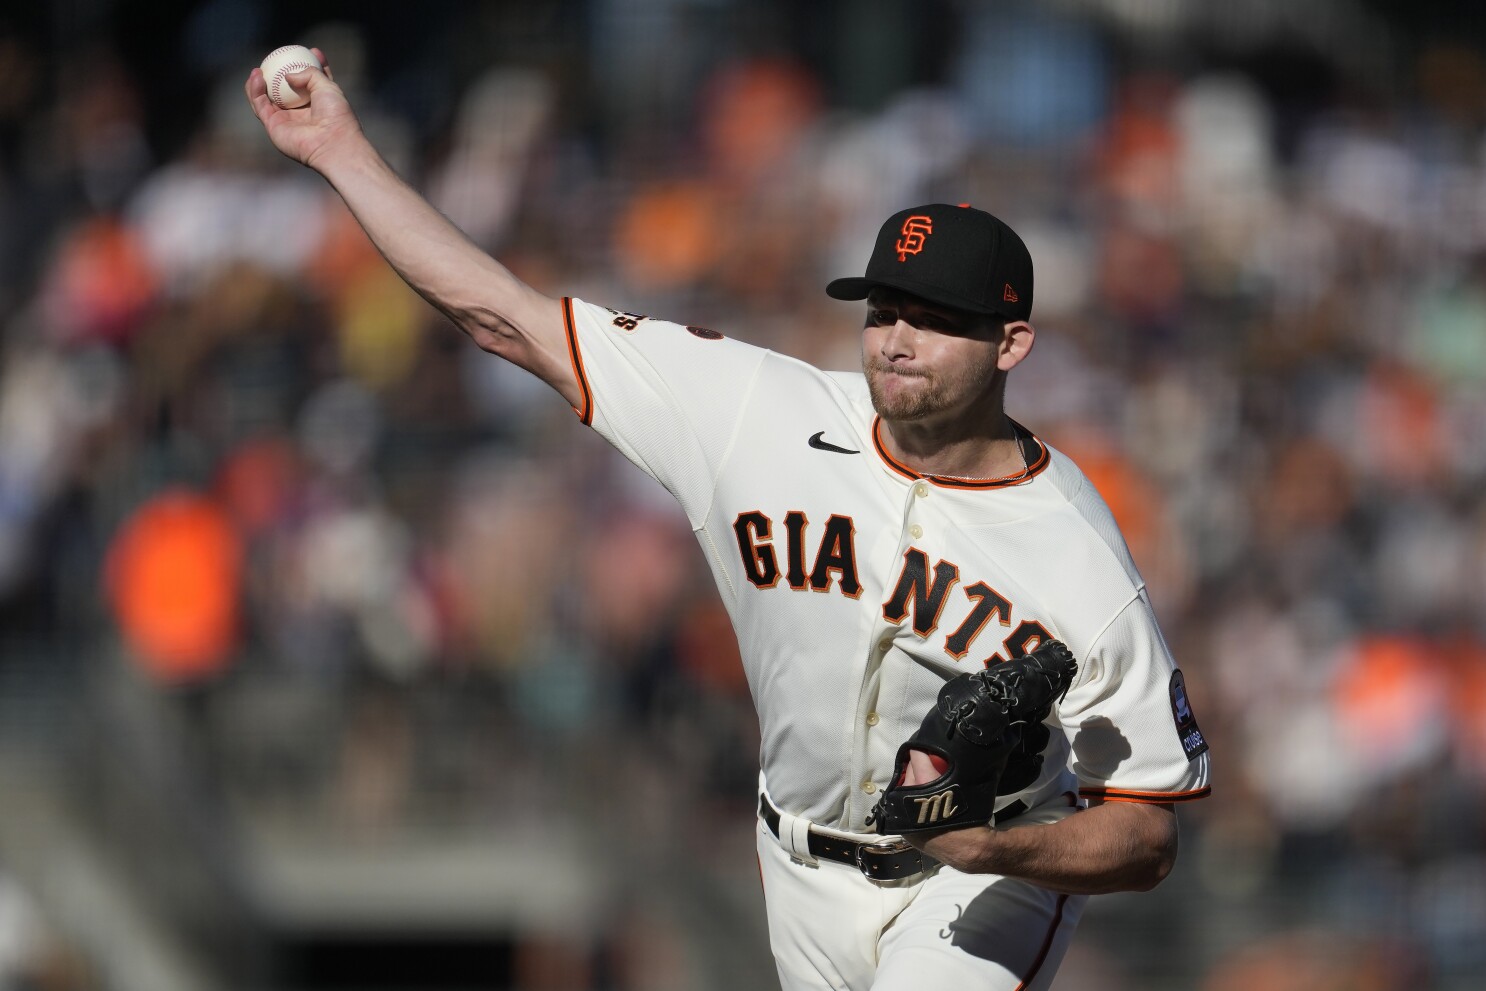 Giants Pitcher Makes MLB Debut in 1st Time Ever at Big League Ballpark